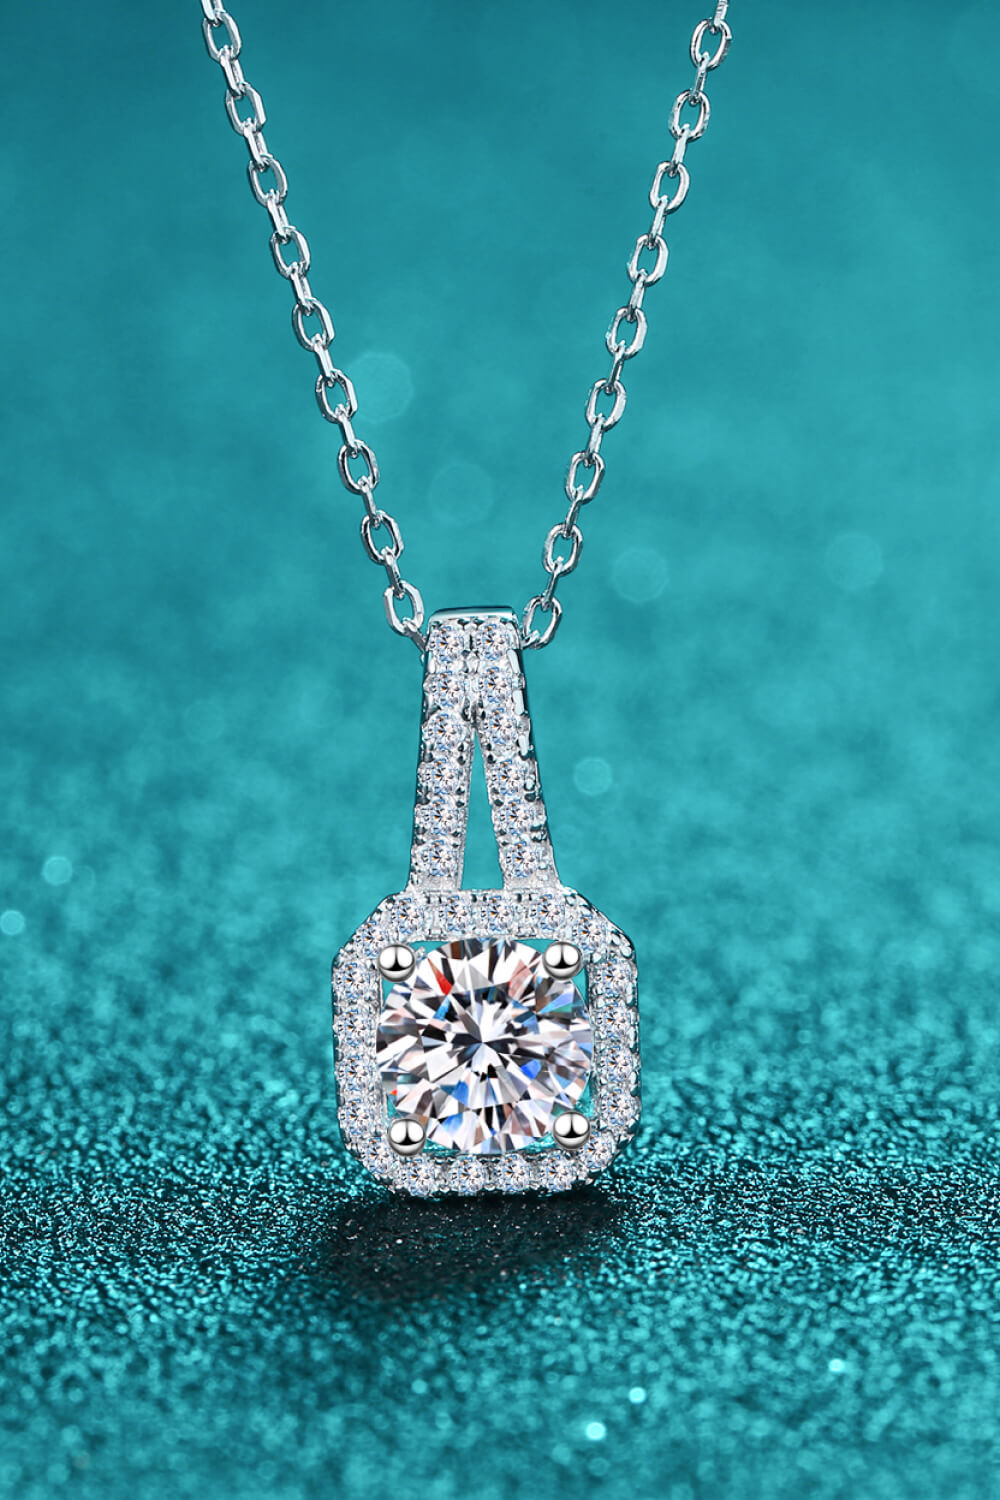 Look Amazing 2 Carat Moissanite Pendant Necklace - Tophatter Shopping Deals